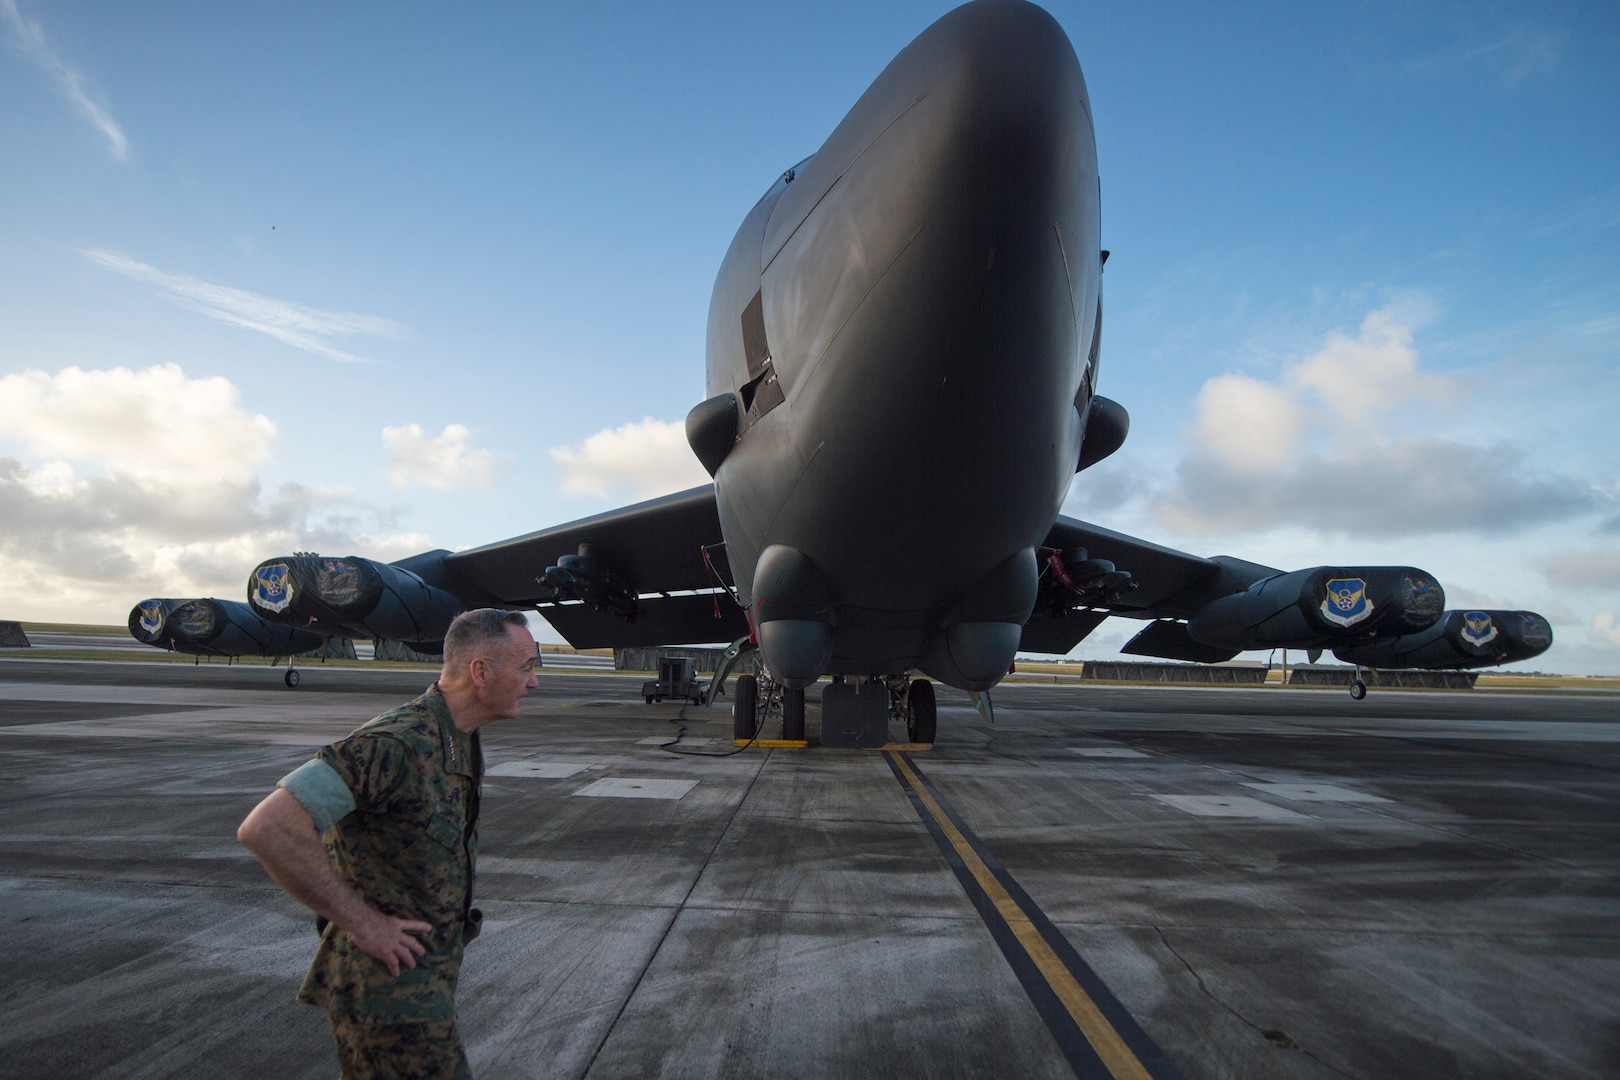 General Dunford walks past B-52 aircraft during tour of Andersen Air Force Base, Guam, February 8, 2018 (DOD/Dominique A. Pineiro)